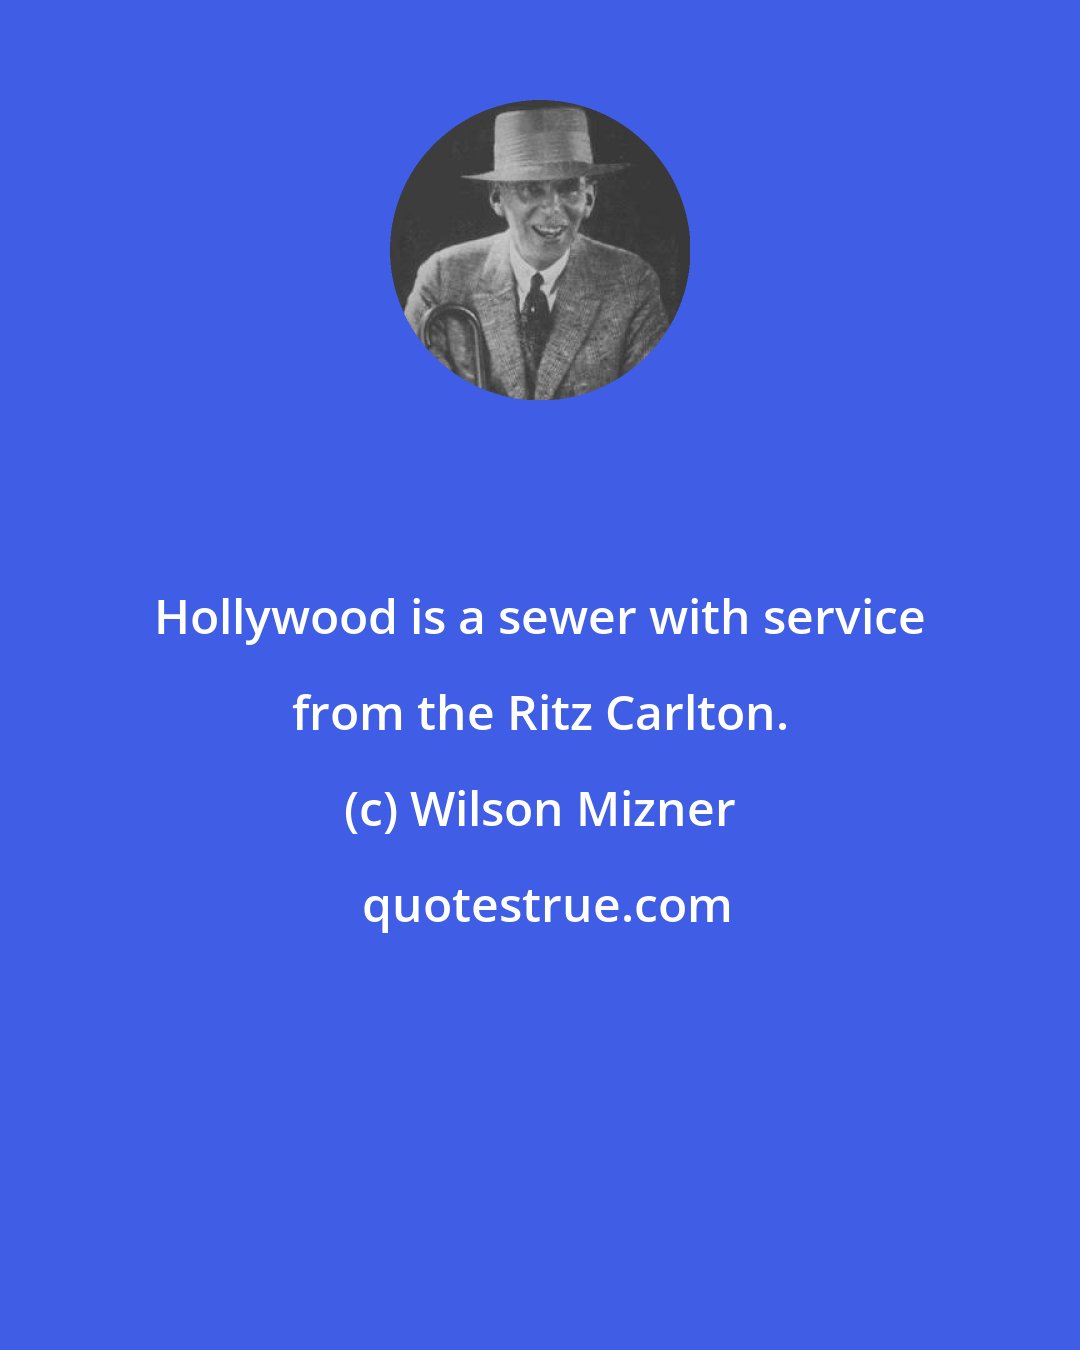 Wilson Mizner: Hollywood is a sewer with service from the Ritz Carlton.